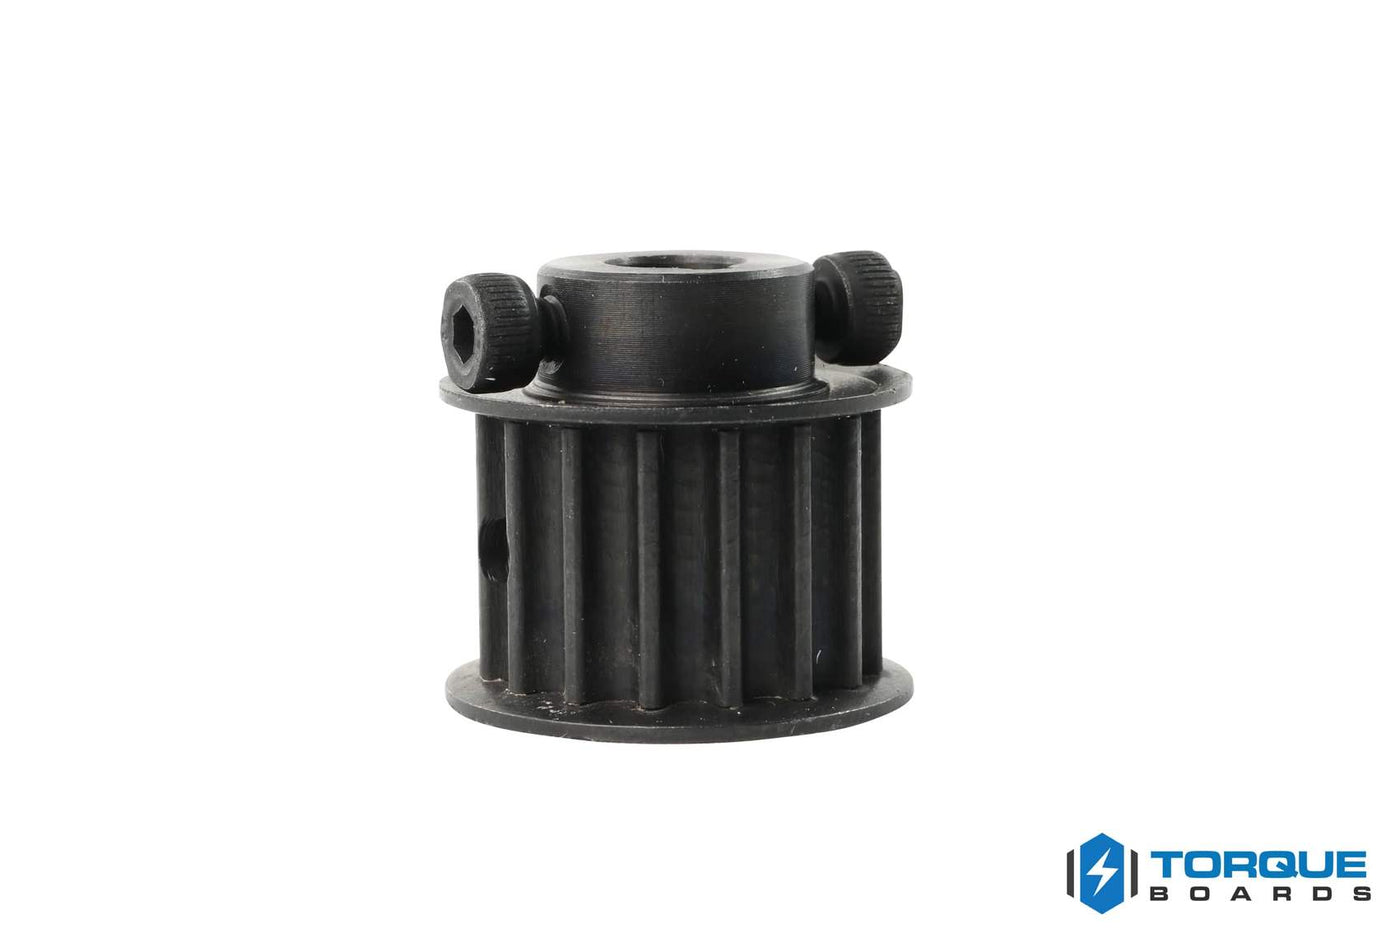 15T HTD5 15mm Motor Pulley